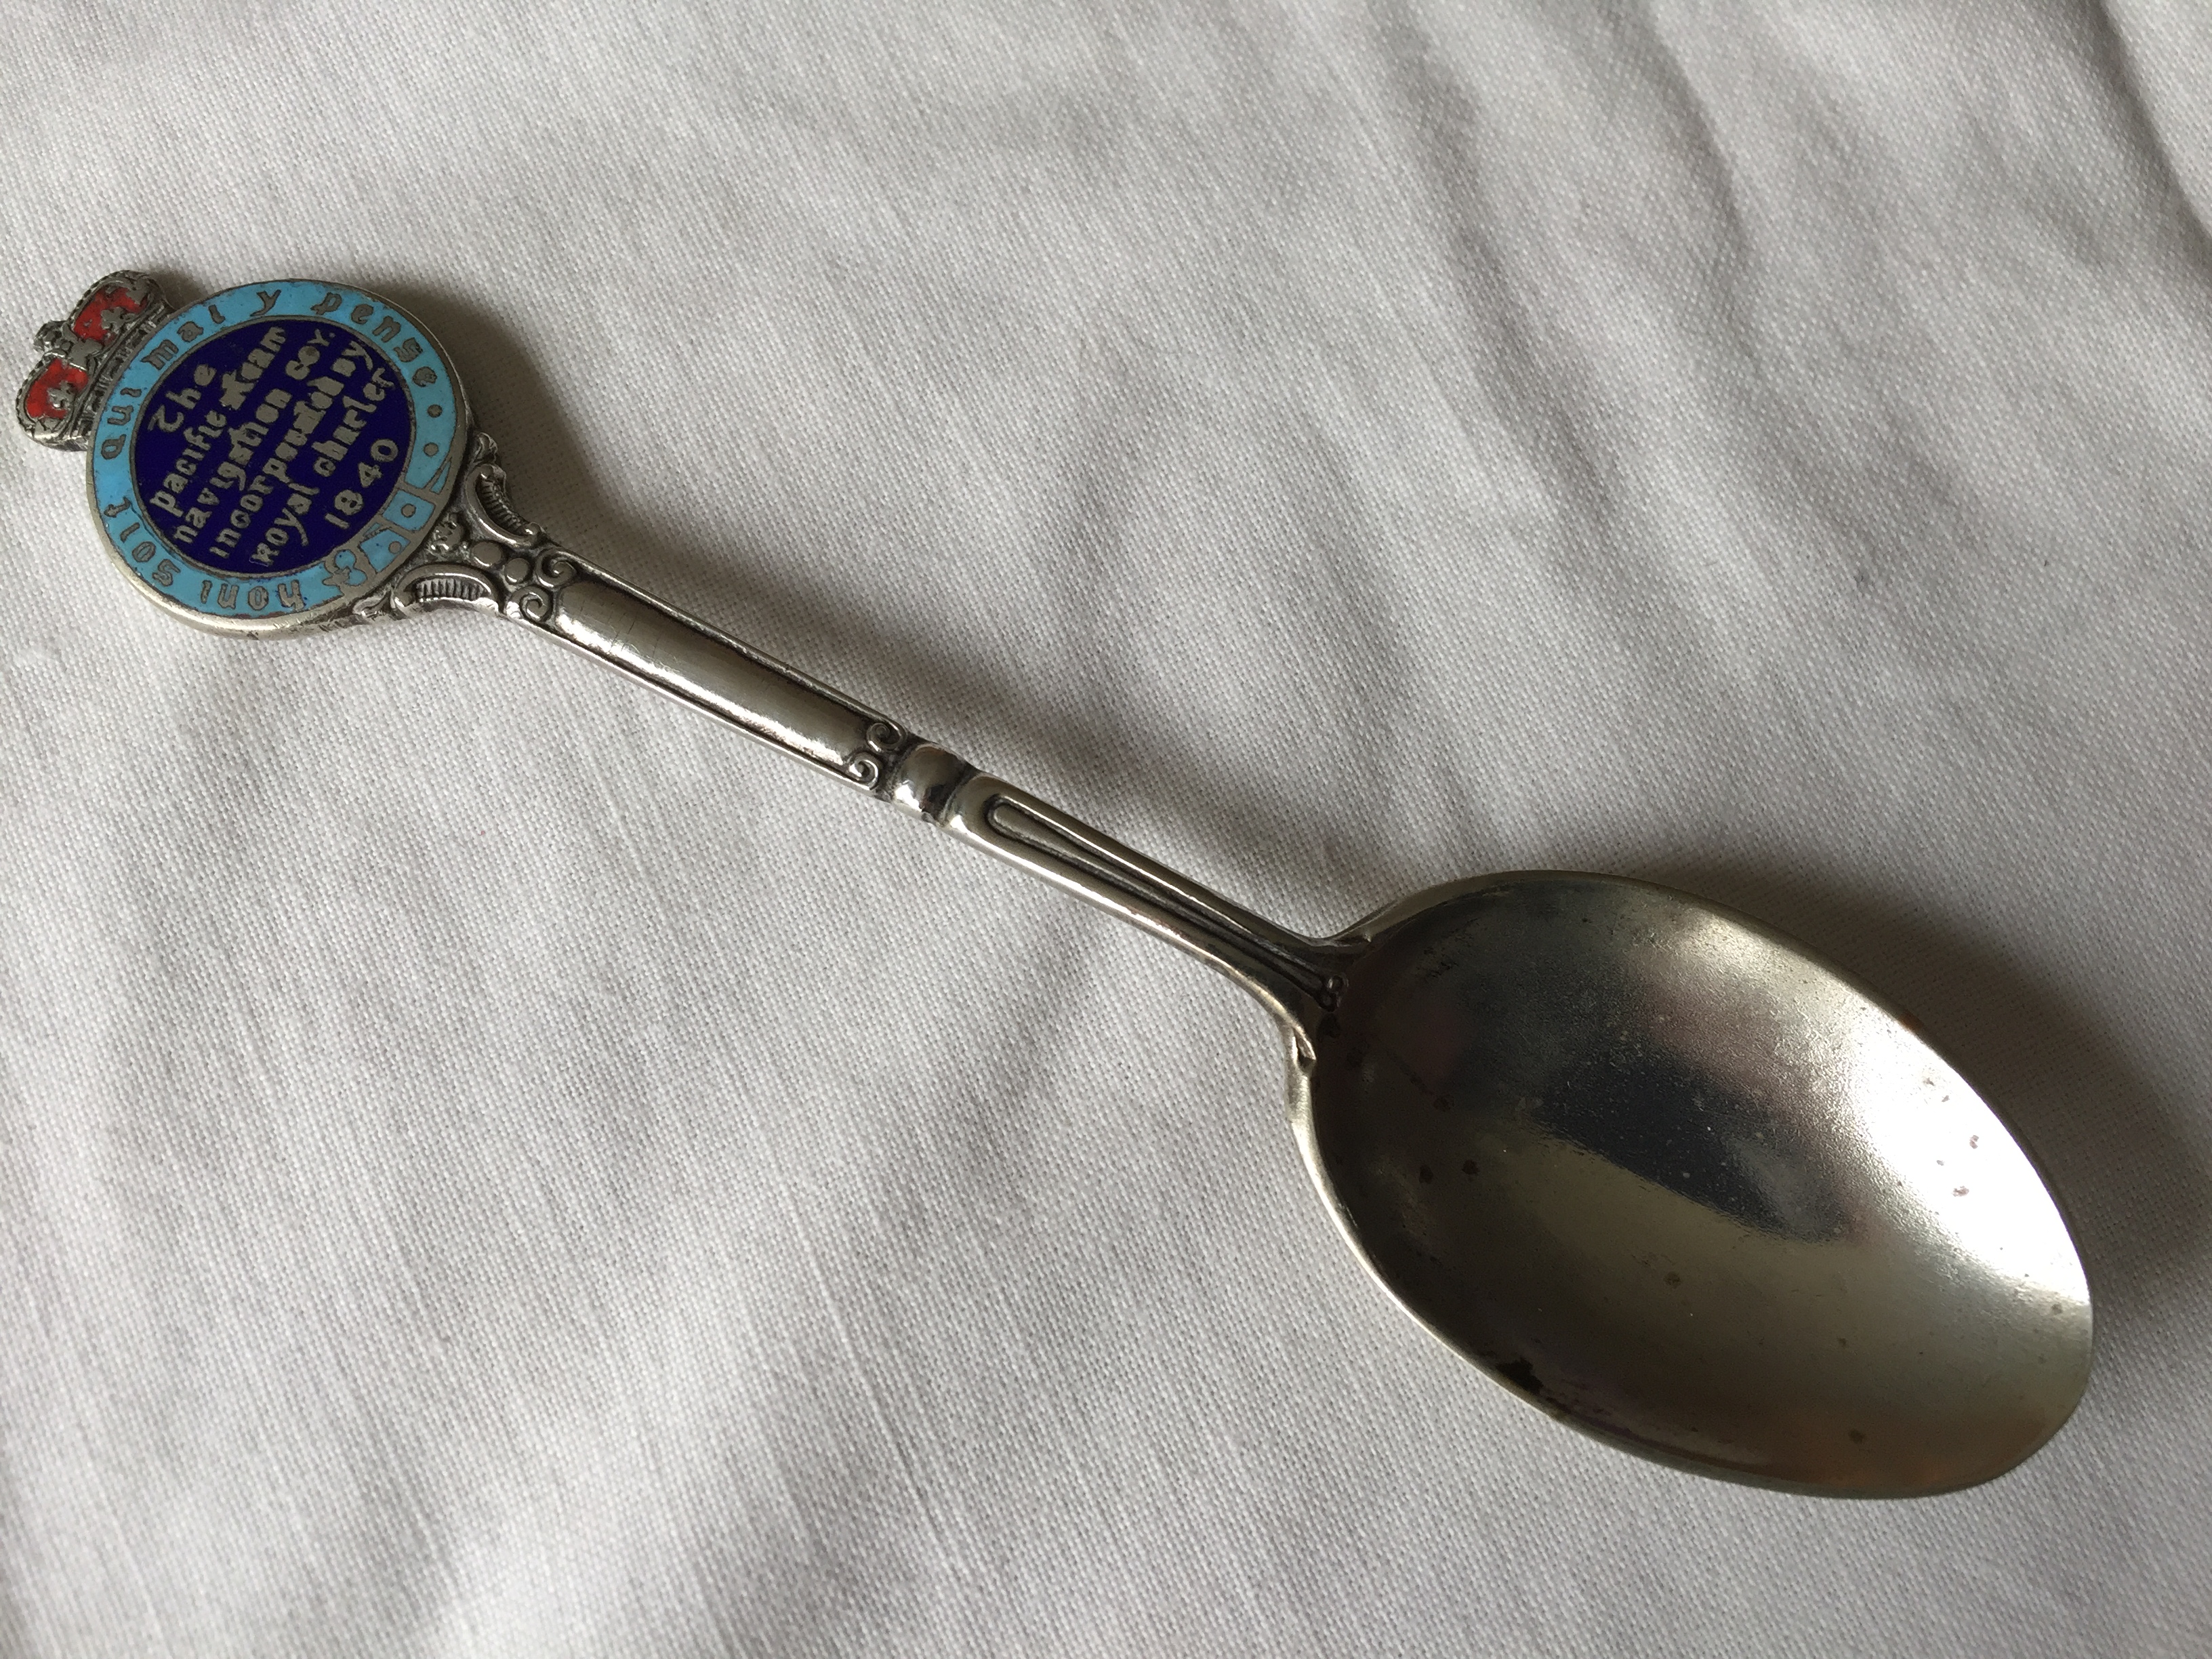 VERY EARLY SOUVENIR SPOON FROM THE PACIFIC STEAM NAVIGATION COMPANY